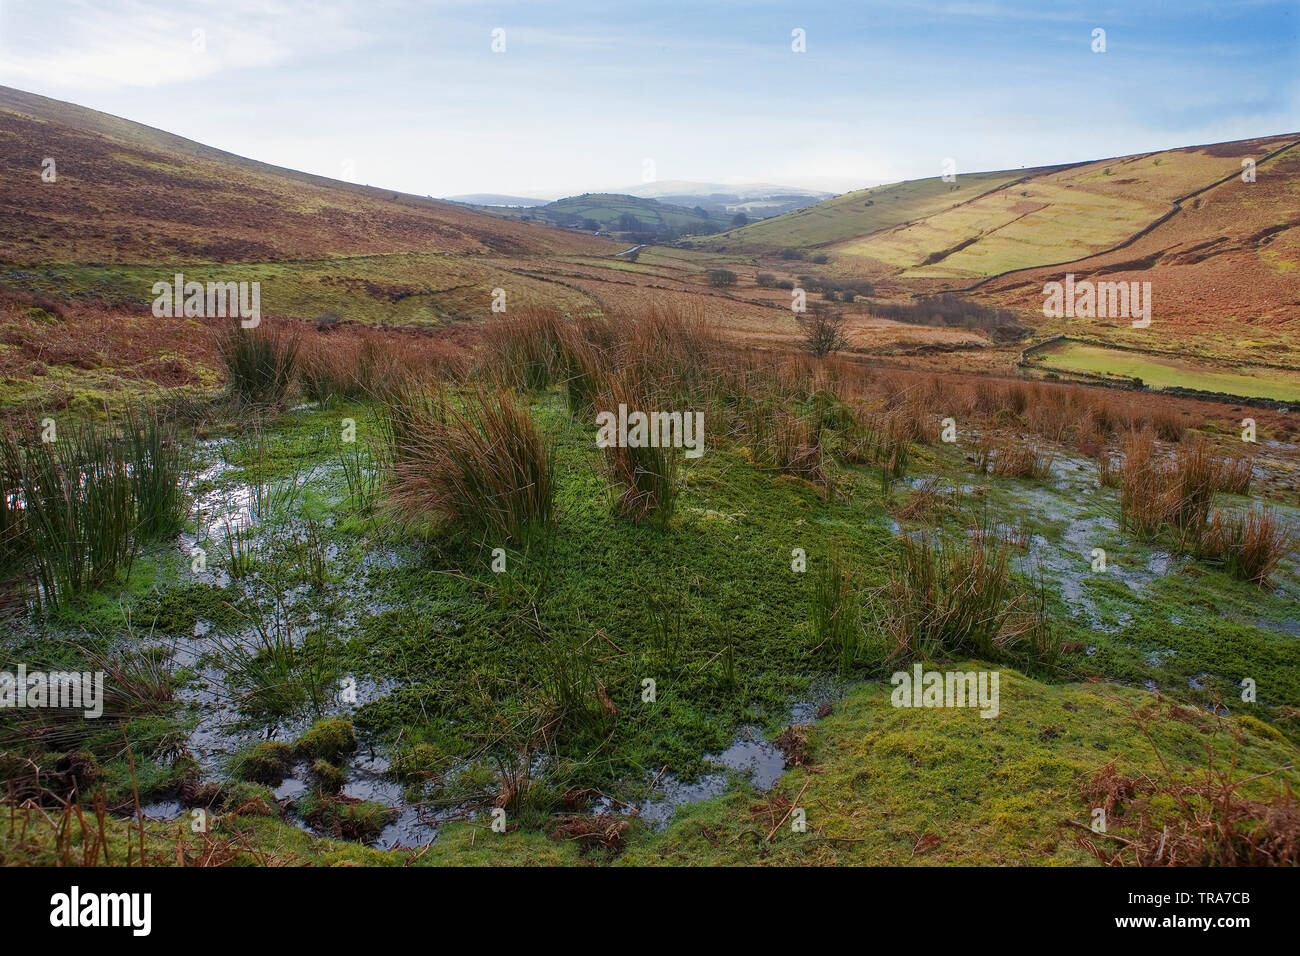 The West Webburn River Valley from Hookney Down, Dartmoor, Devon: the marshy Grim's Lake in the foreground Stock Photo